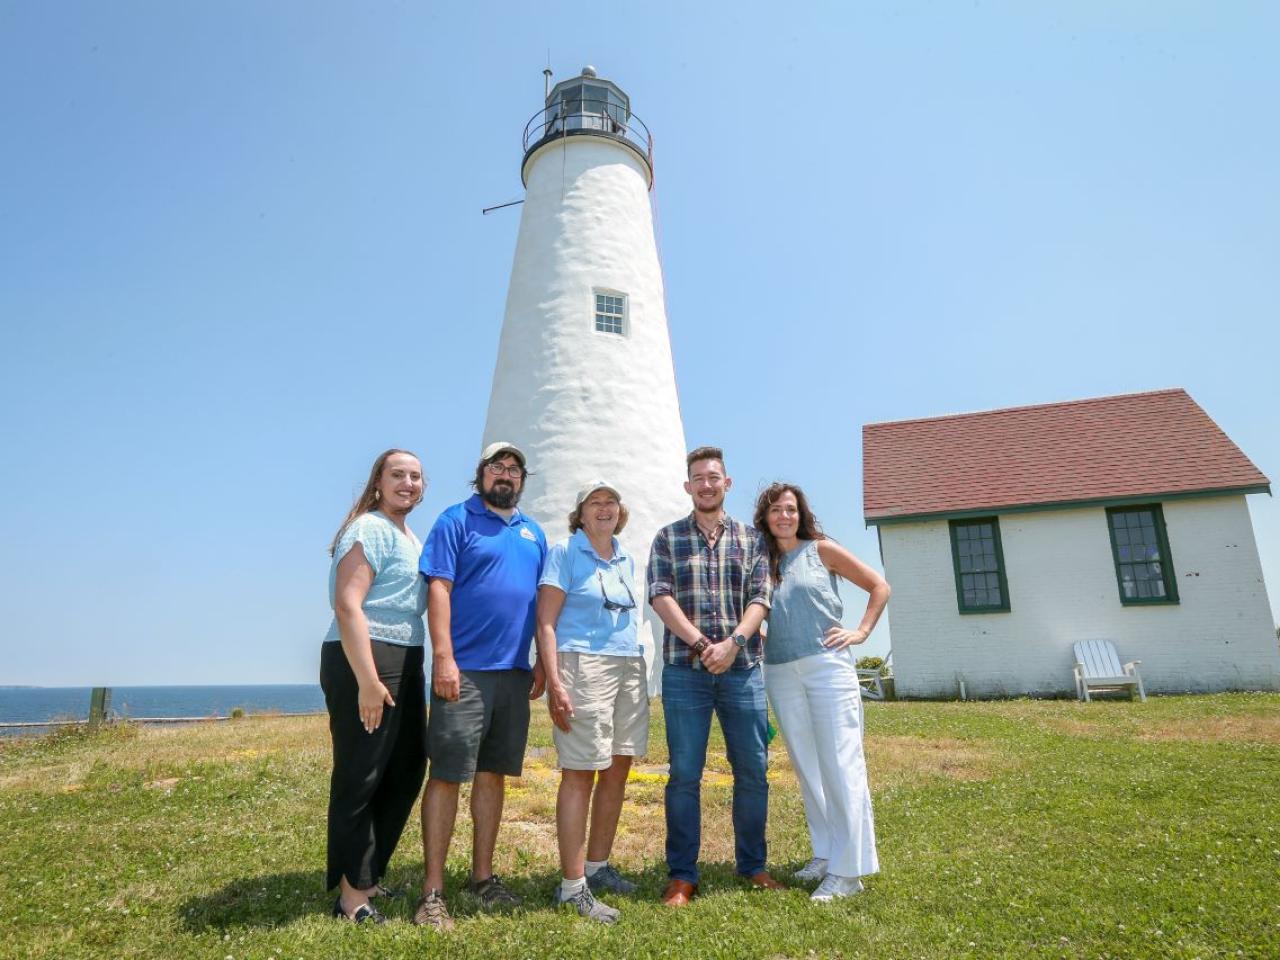 A group of five people pose in front of a light house on an island.